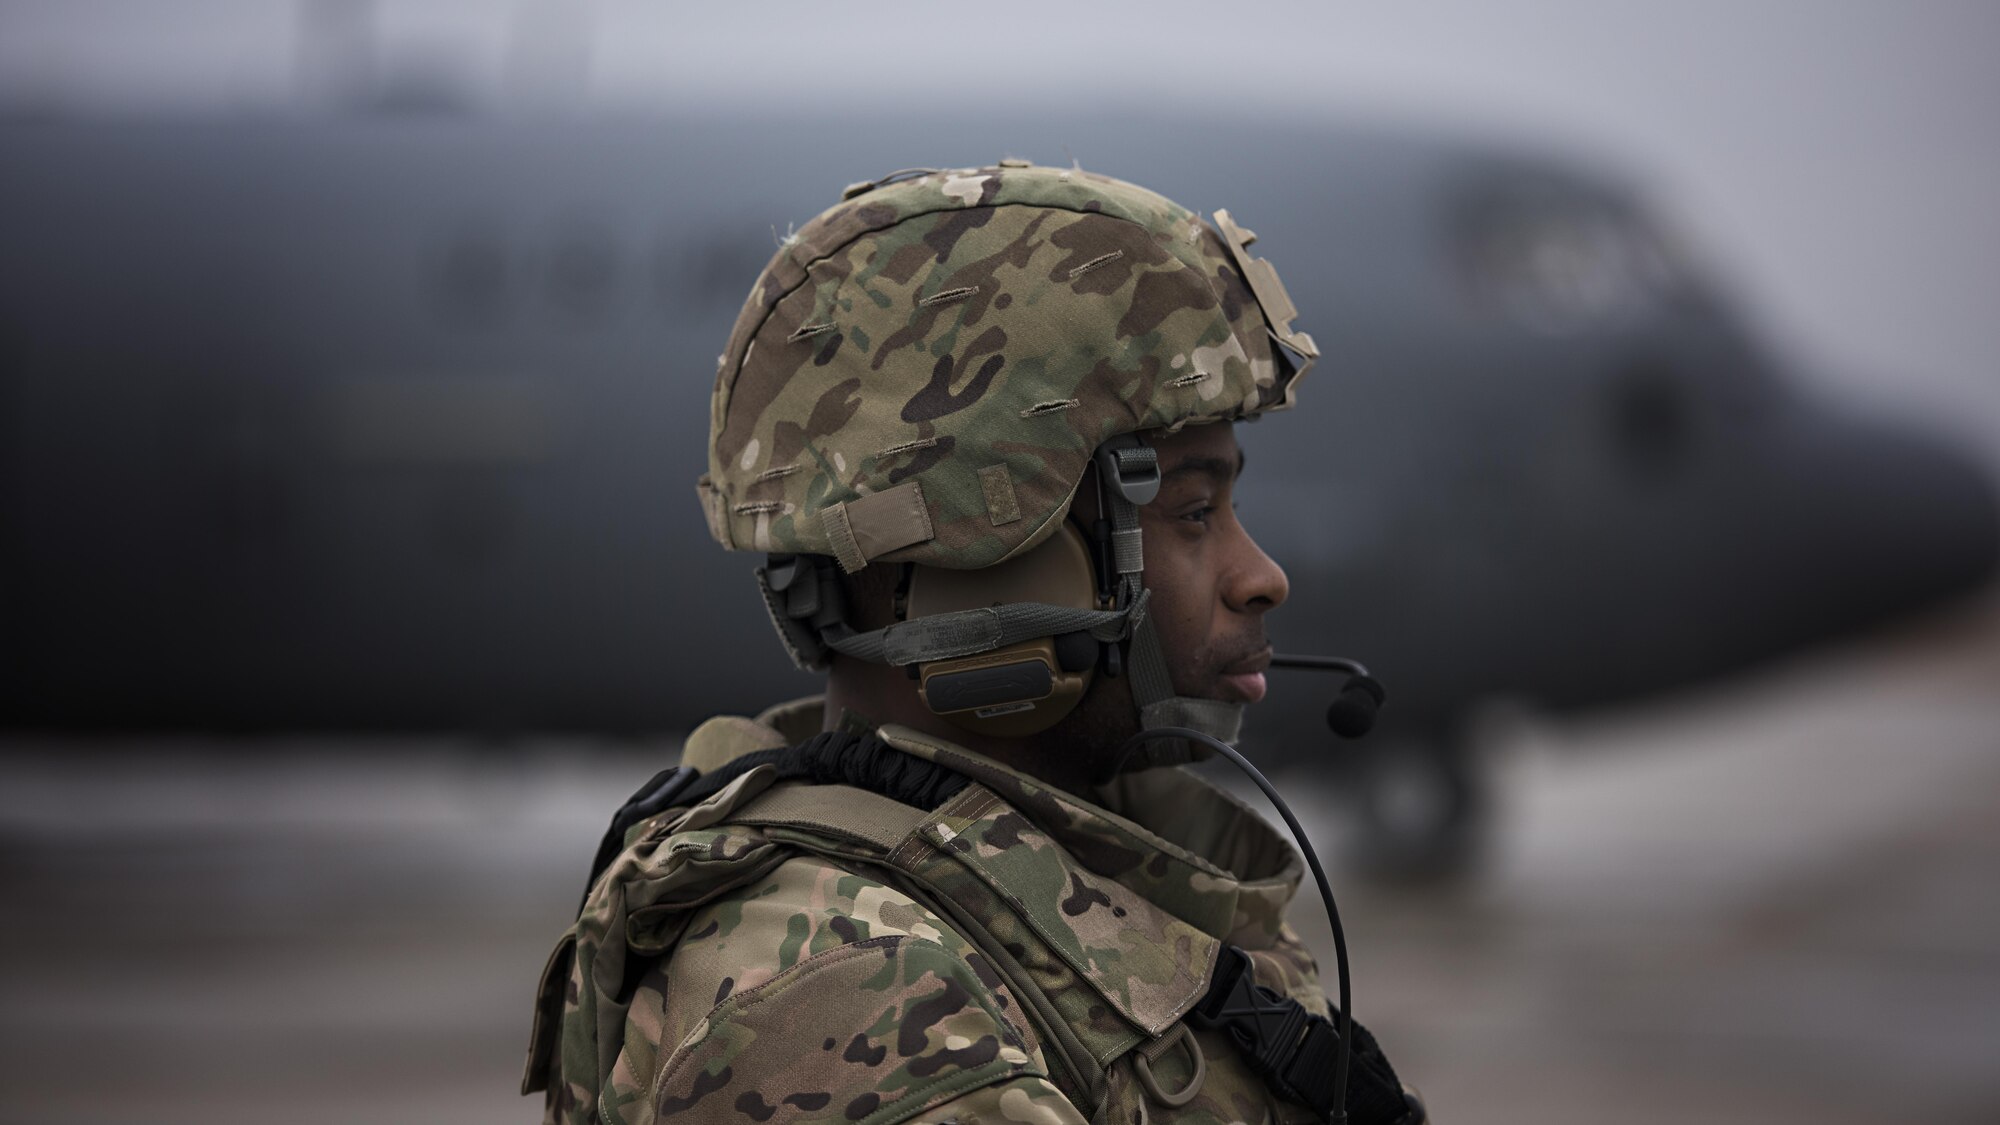 Staff Sgt. Rashon Battle, 455th Expeditionary Security Forces Squadron Fly Away Security Team member, provide security for a C-130J Hercules and its aircrew at Camp Bastion, Afghanistan, Feb. 17, 2017. FAST members protect aircraft and aircrew in austere locations. (U.S. Air Force photo by Staff Sgt. Katherine Spessa)